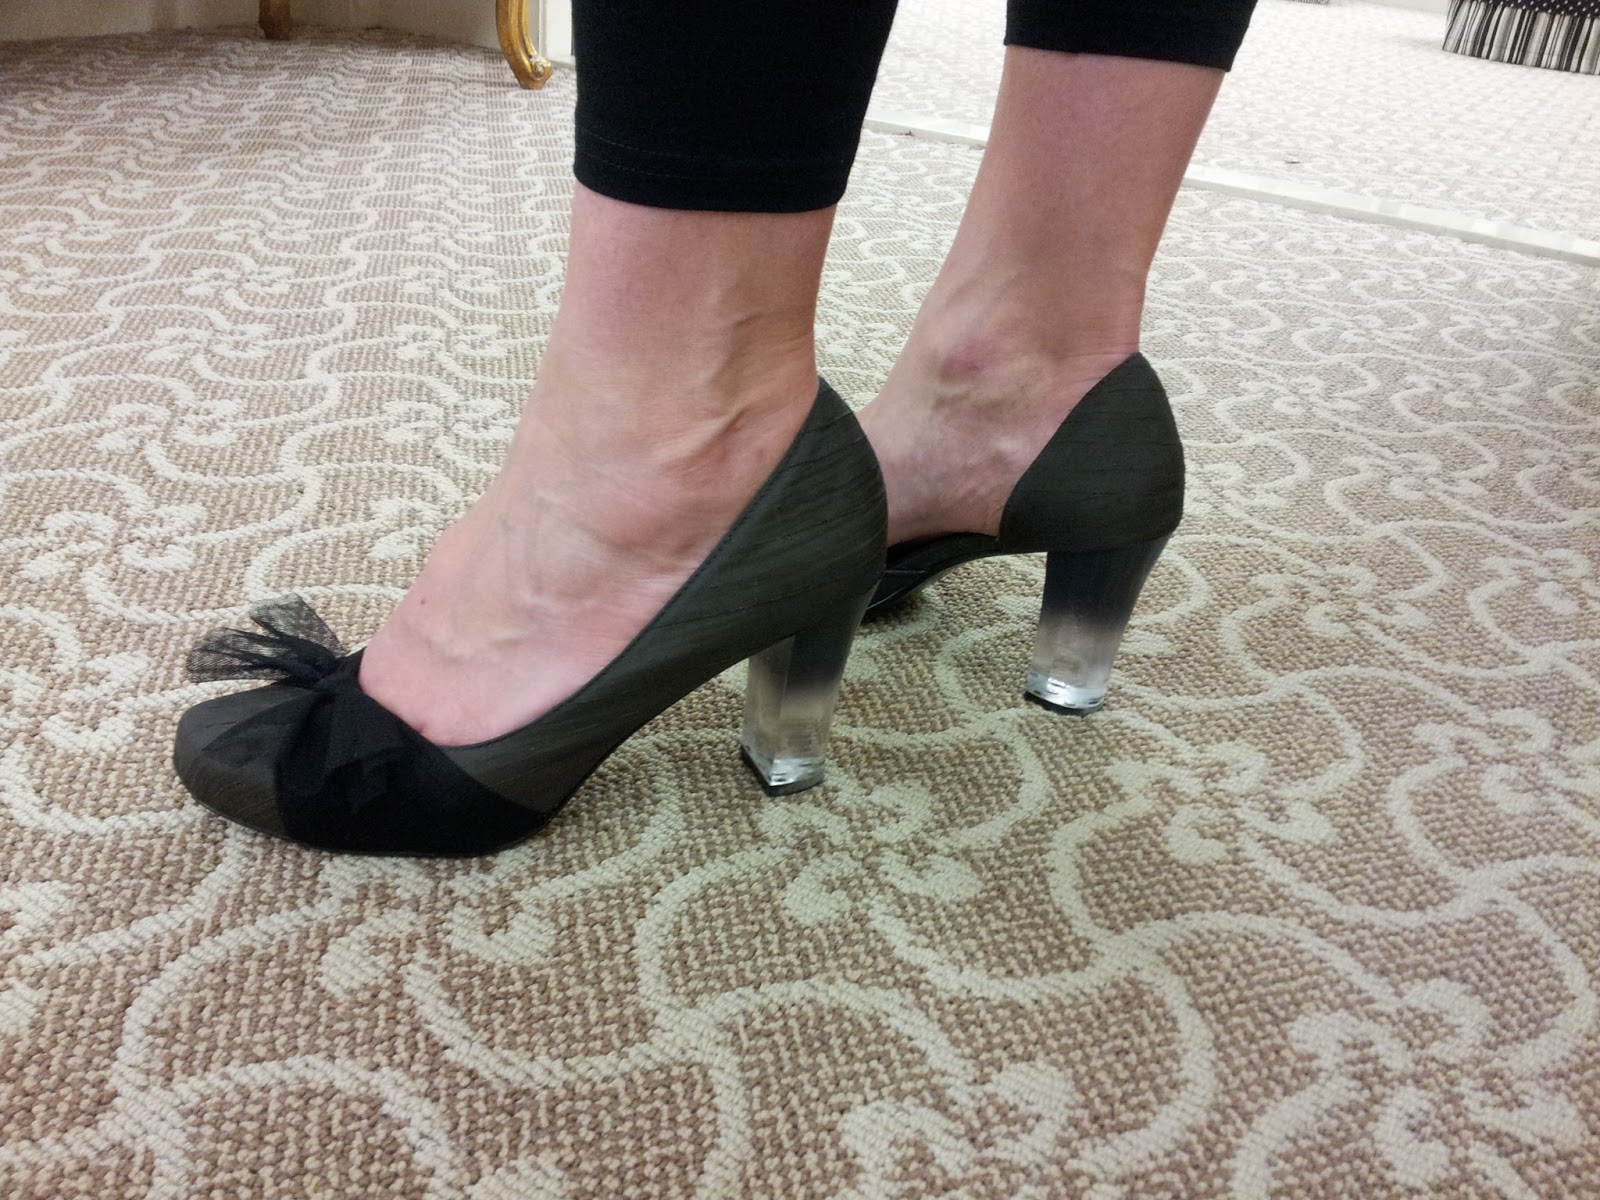 Style... the New Black: Shoesday Tuesday: Joann's Heels